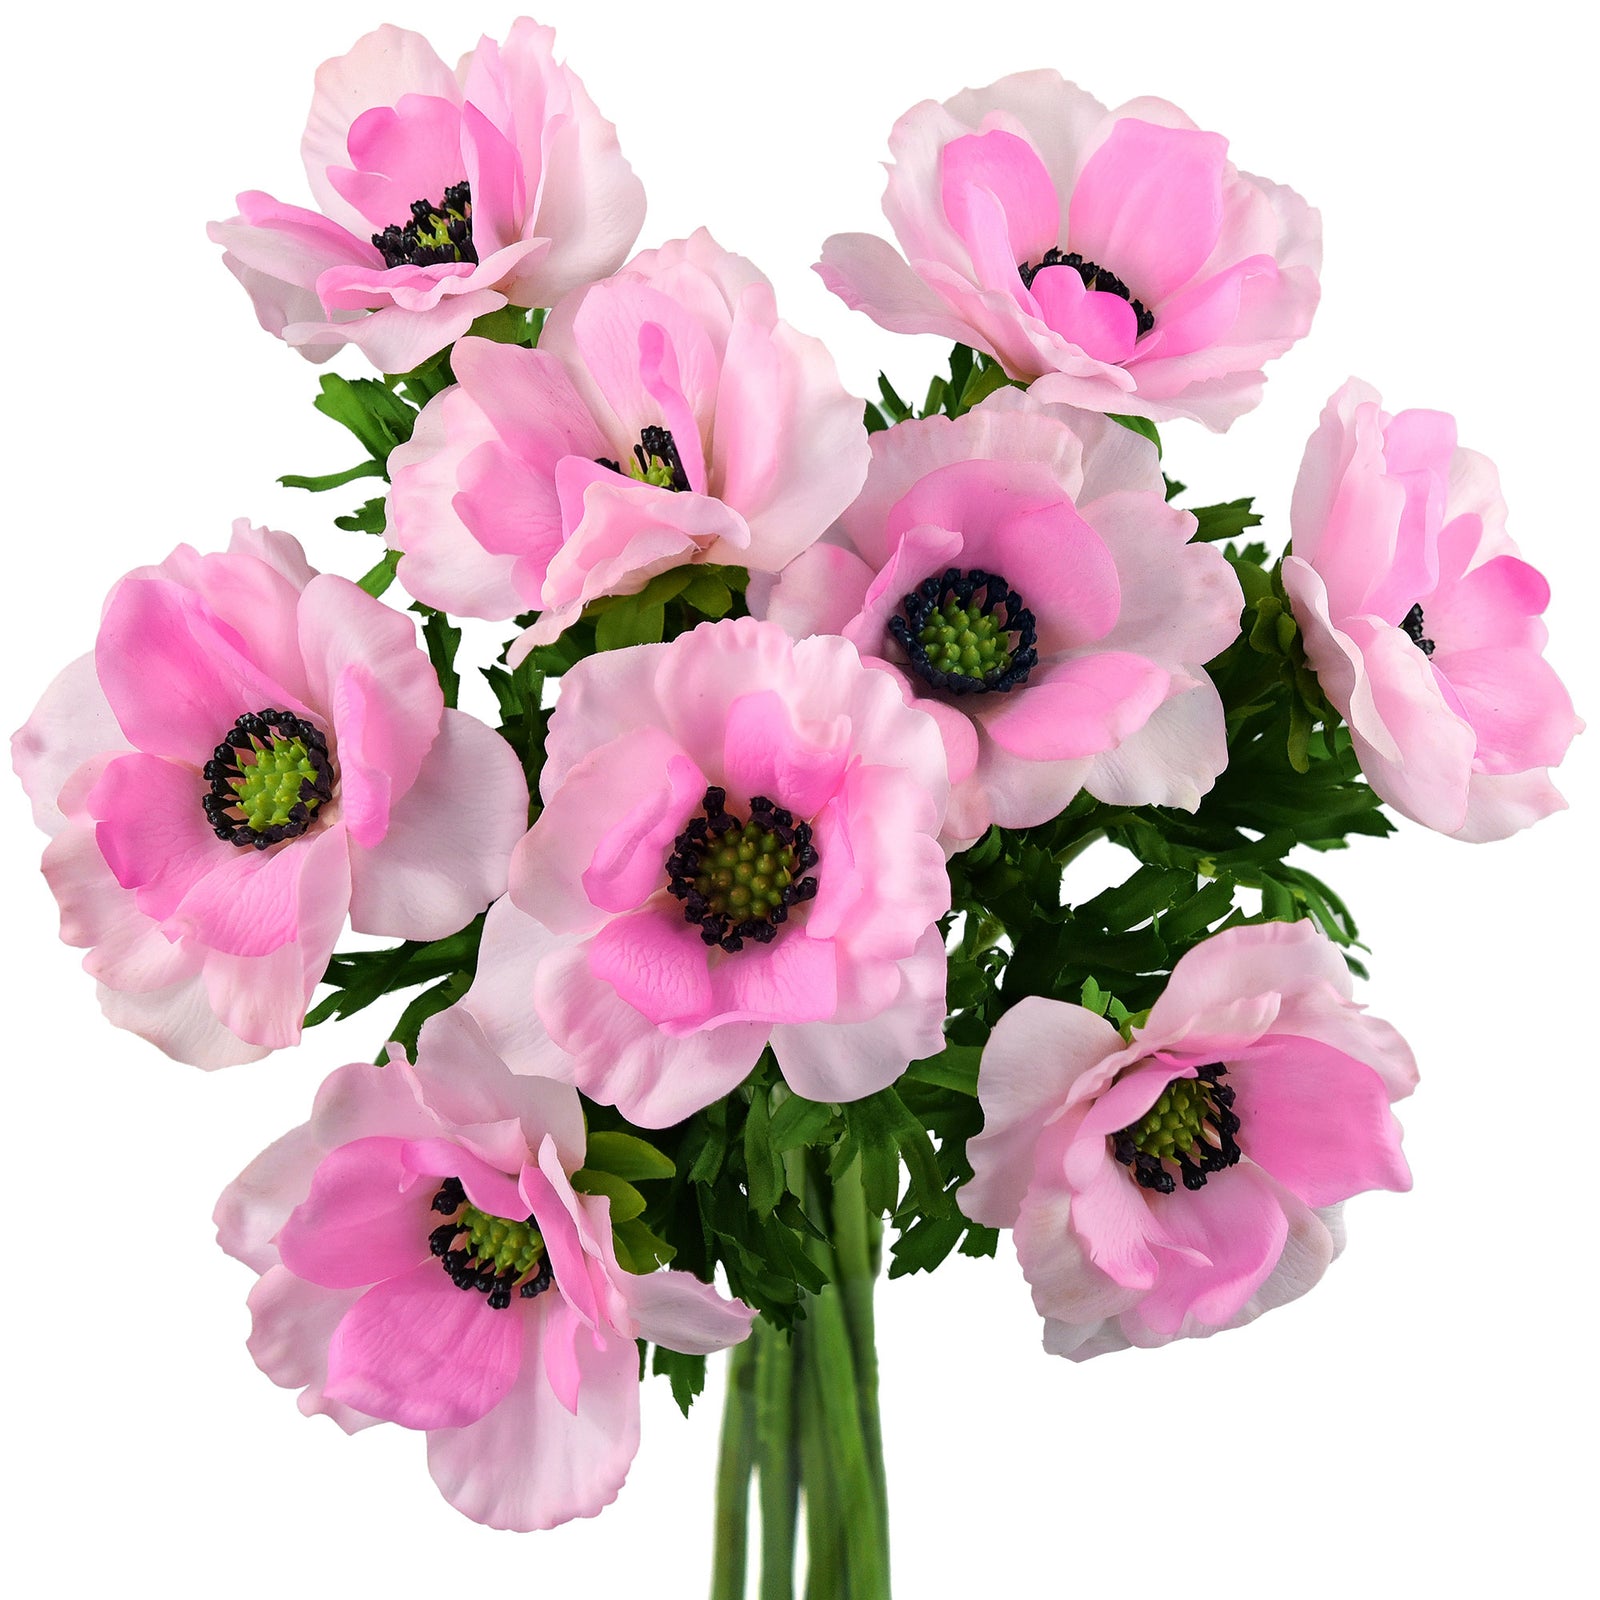 9 Long Stems of ‘Real Touch’ (Refreshing Pink) Artificial Anemone Silk Flowers with Leaves 48cm (18.9 inches)